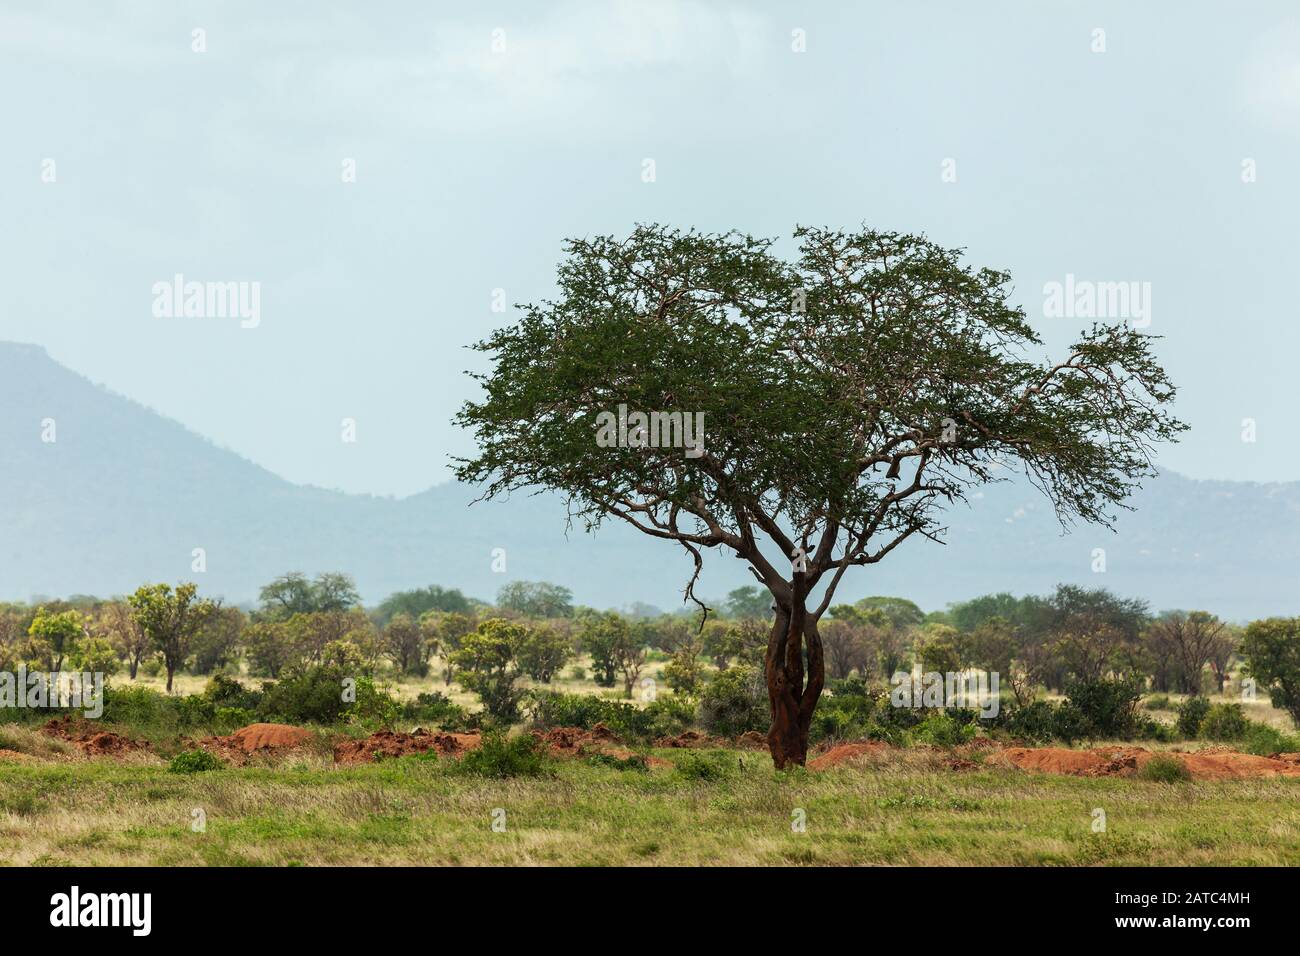 A lonely tree in dry grass, with a mountain hidden in mist in background (Tsavo East National Park, Kenya) Stock Photo